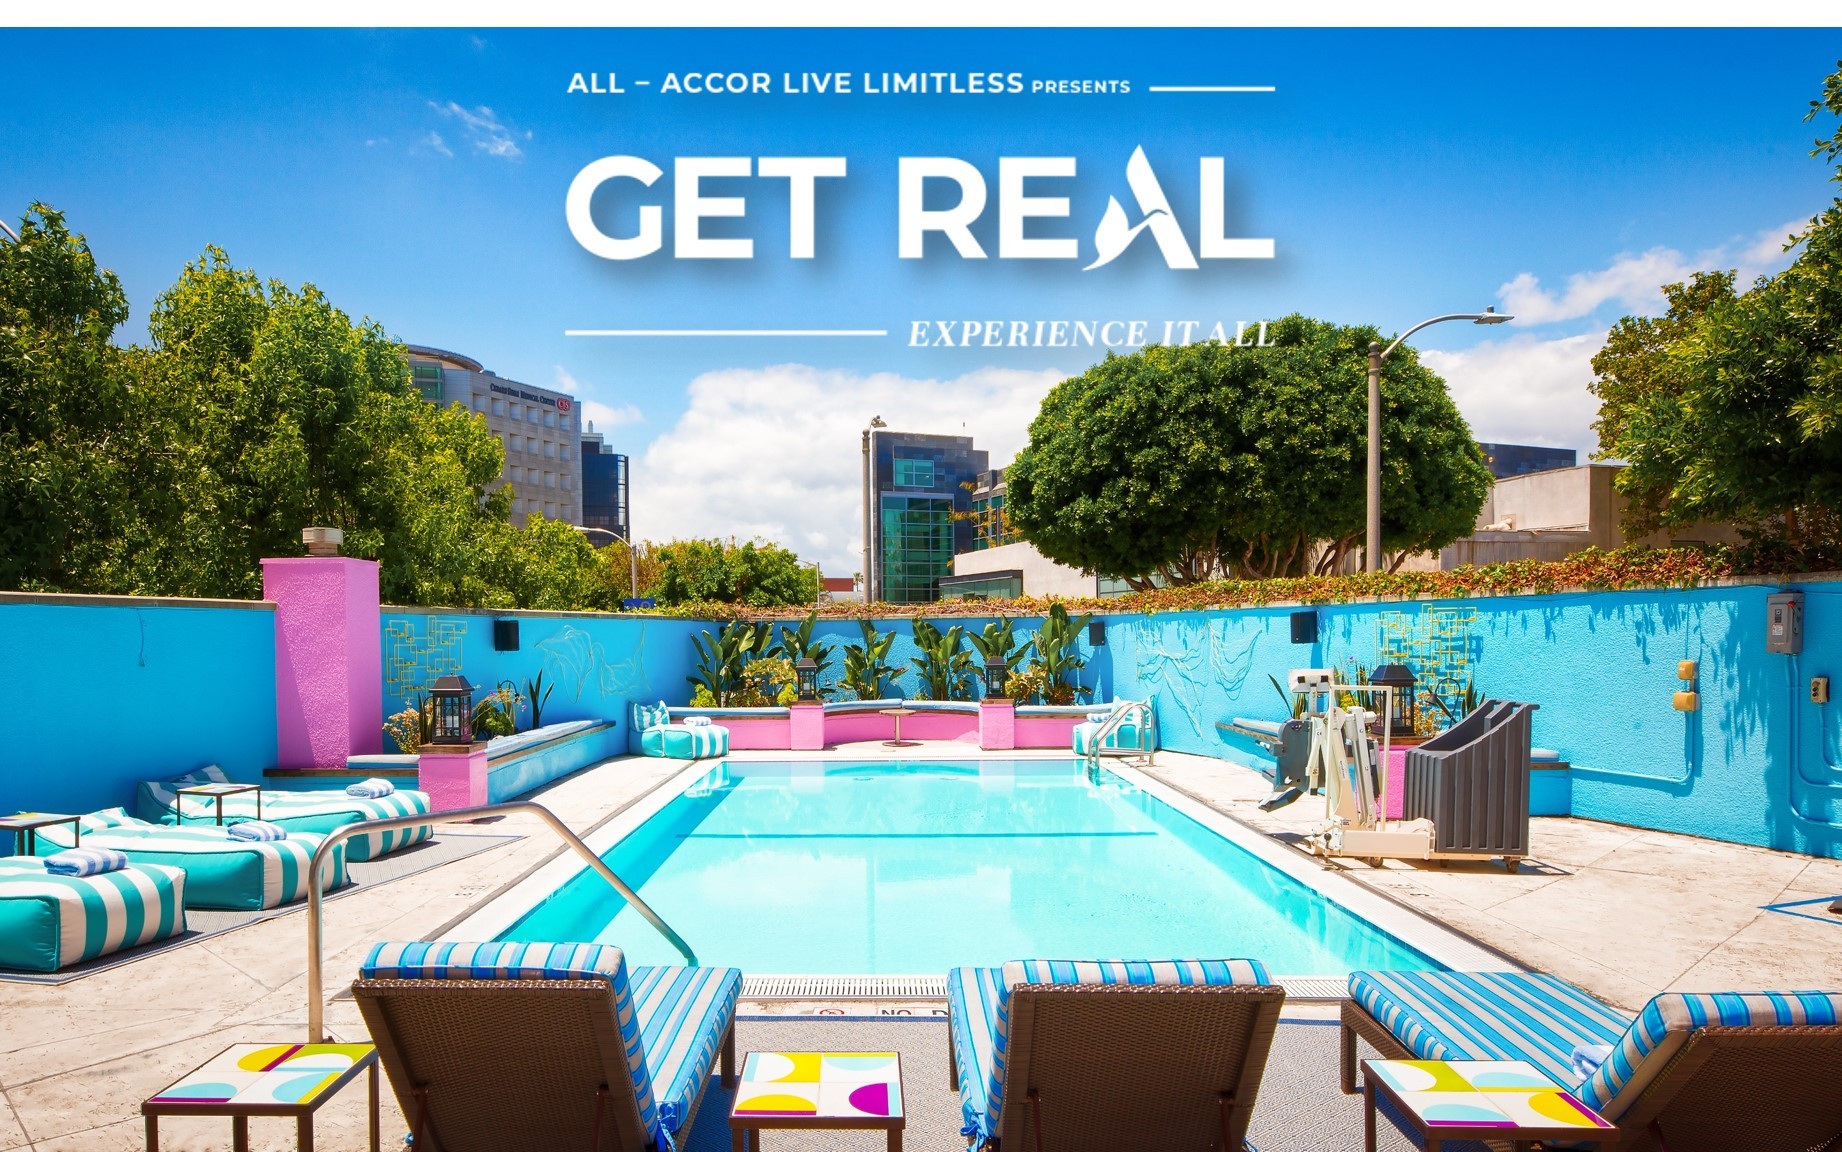 Photo of the hotel Sofitel Los Angeles at Beverly Hills: Get real experience it all summer campaign banner 3